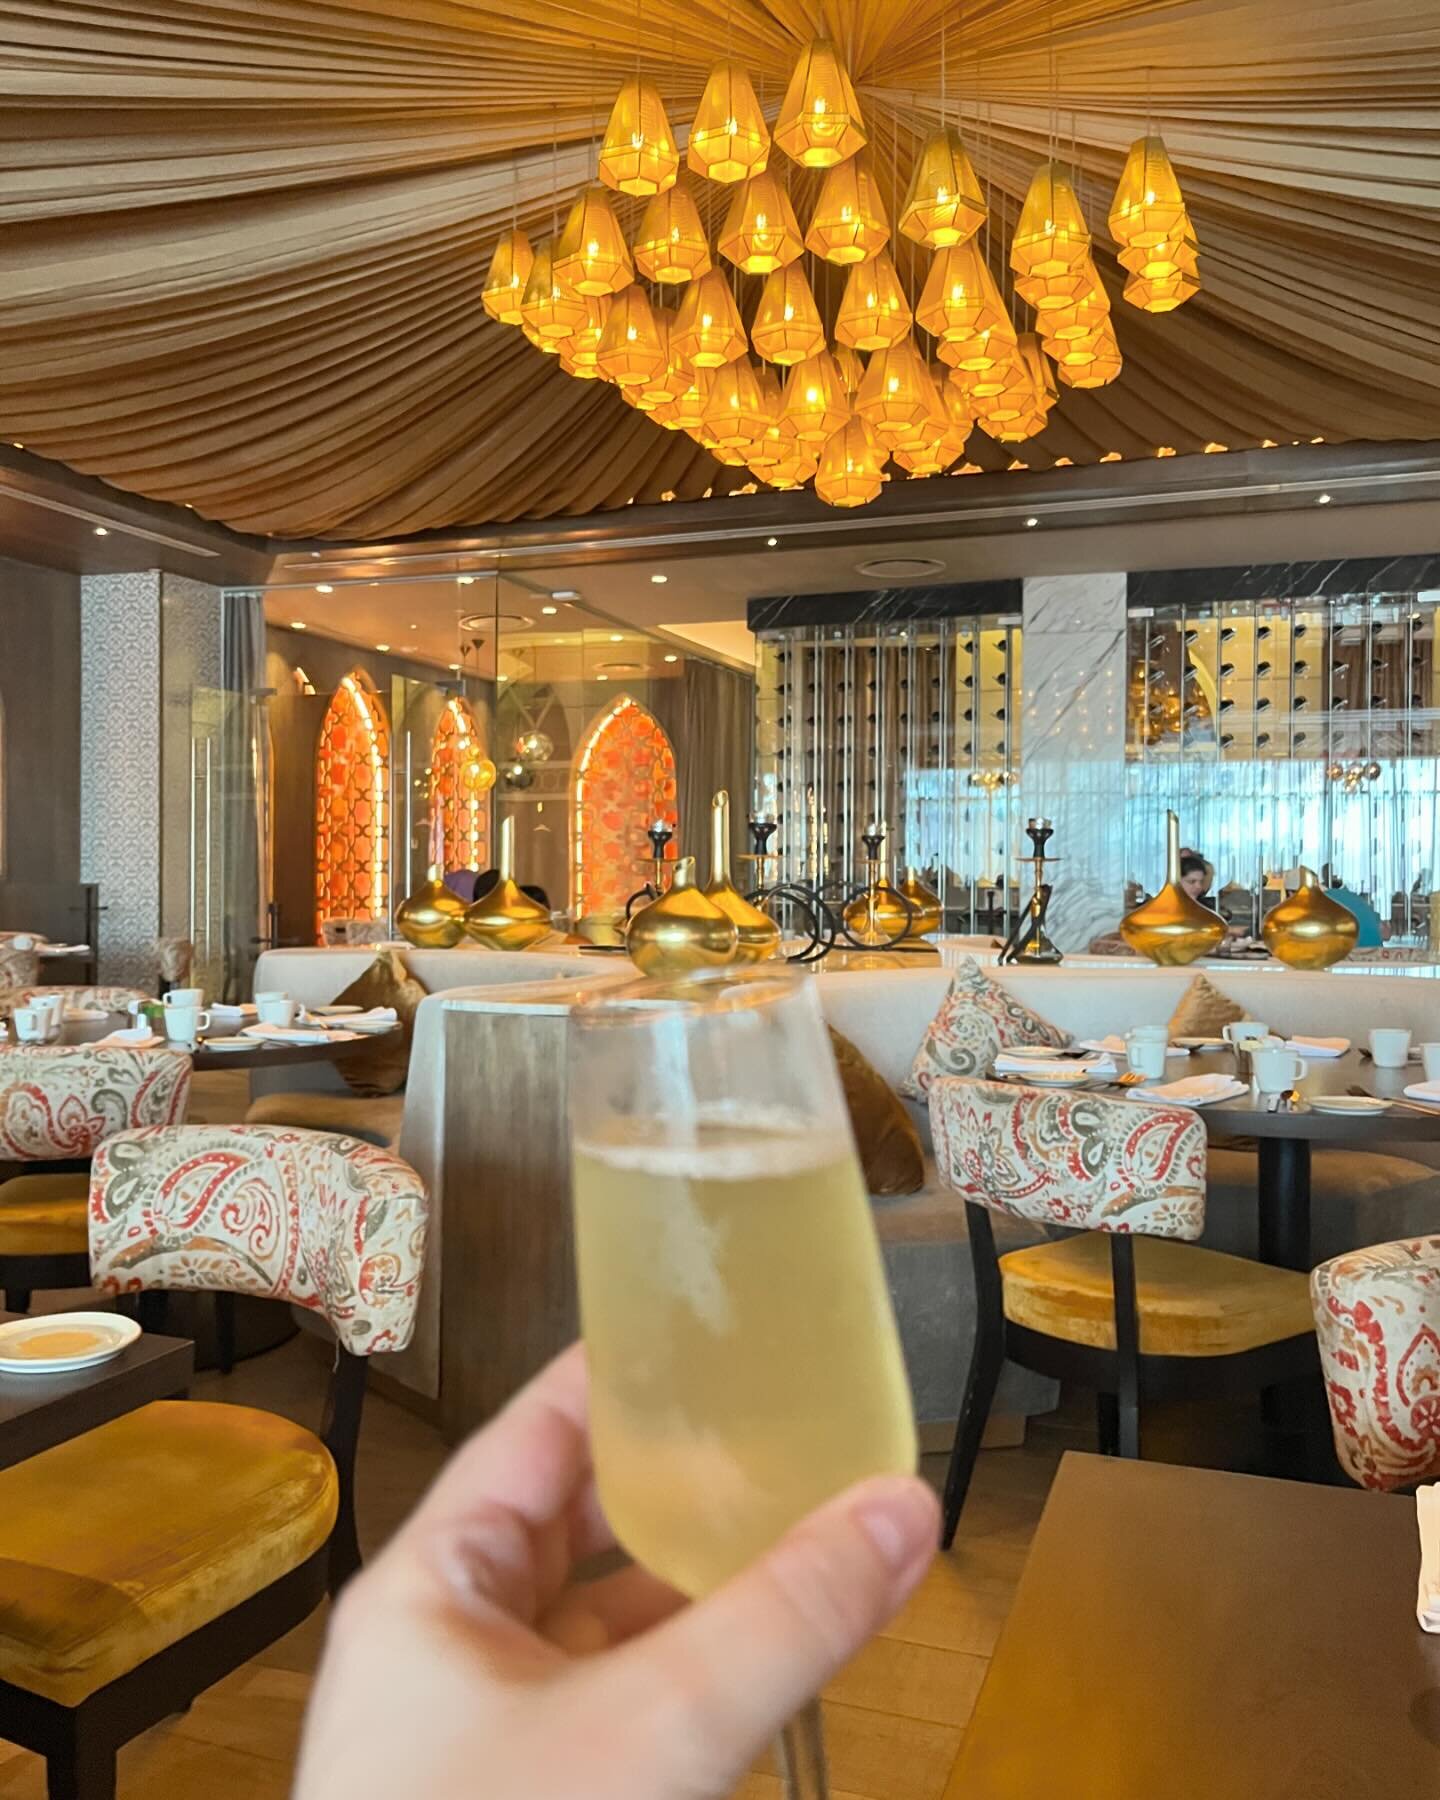 Breakfast MUST DO at The Grand!  Habibi serves tasty pineapple mimosas with all the Lebanese delicacies.  Take me back!